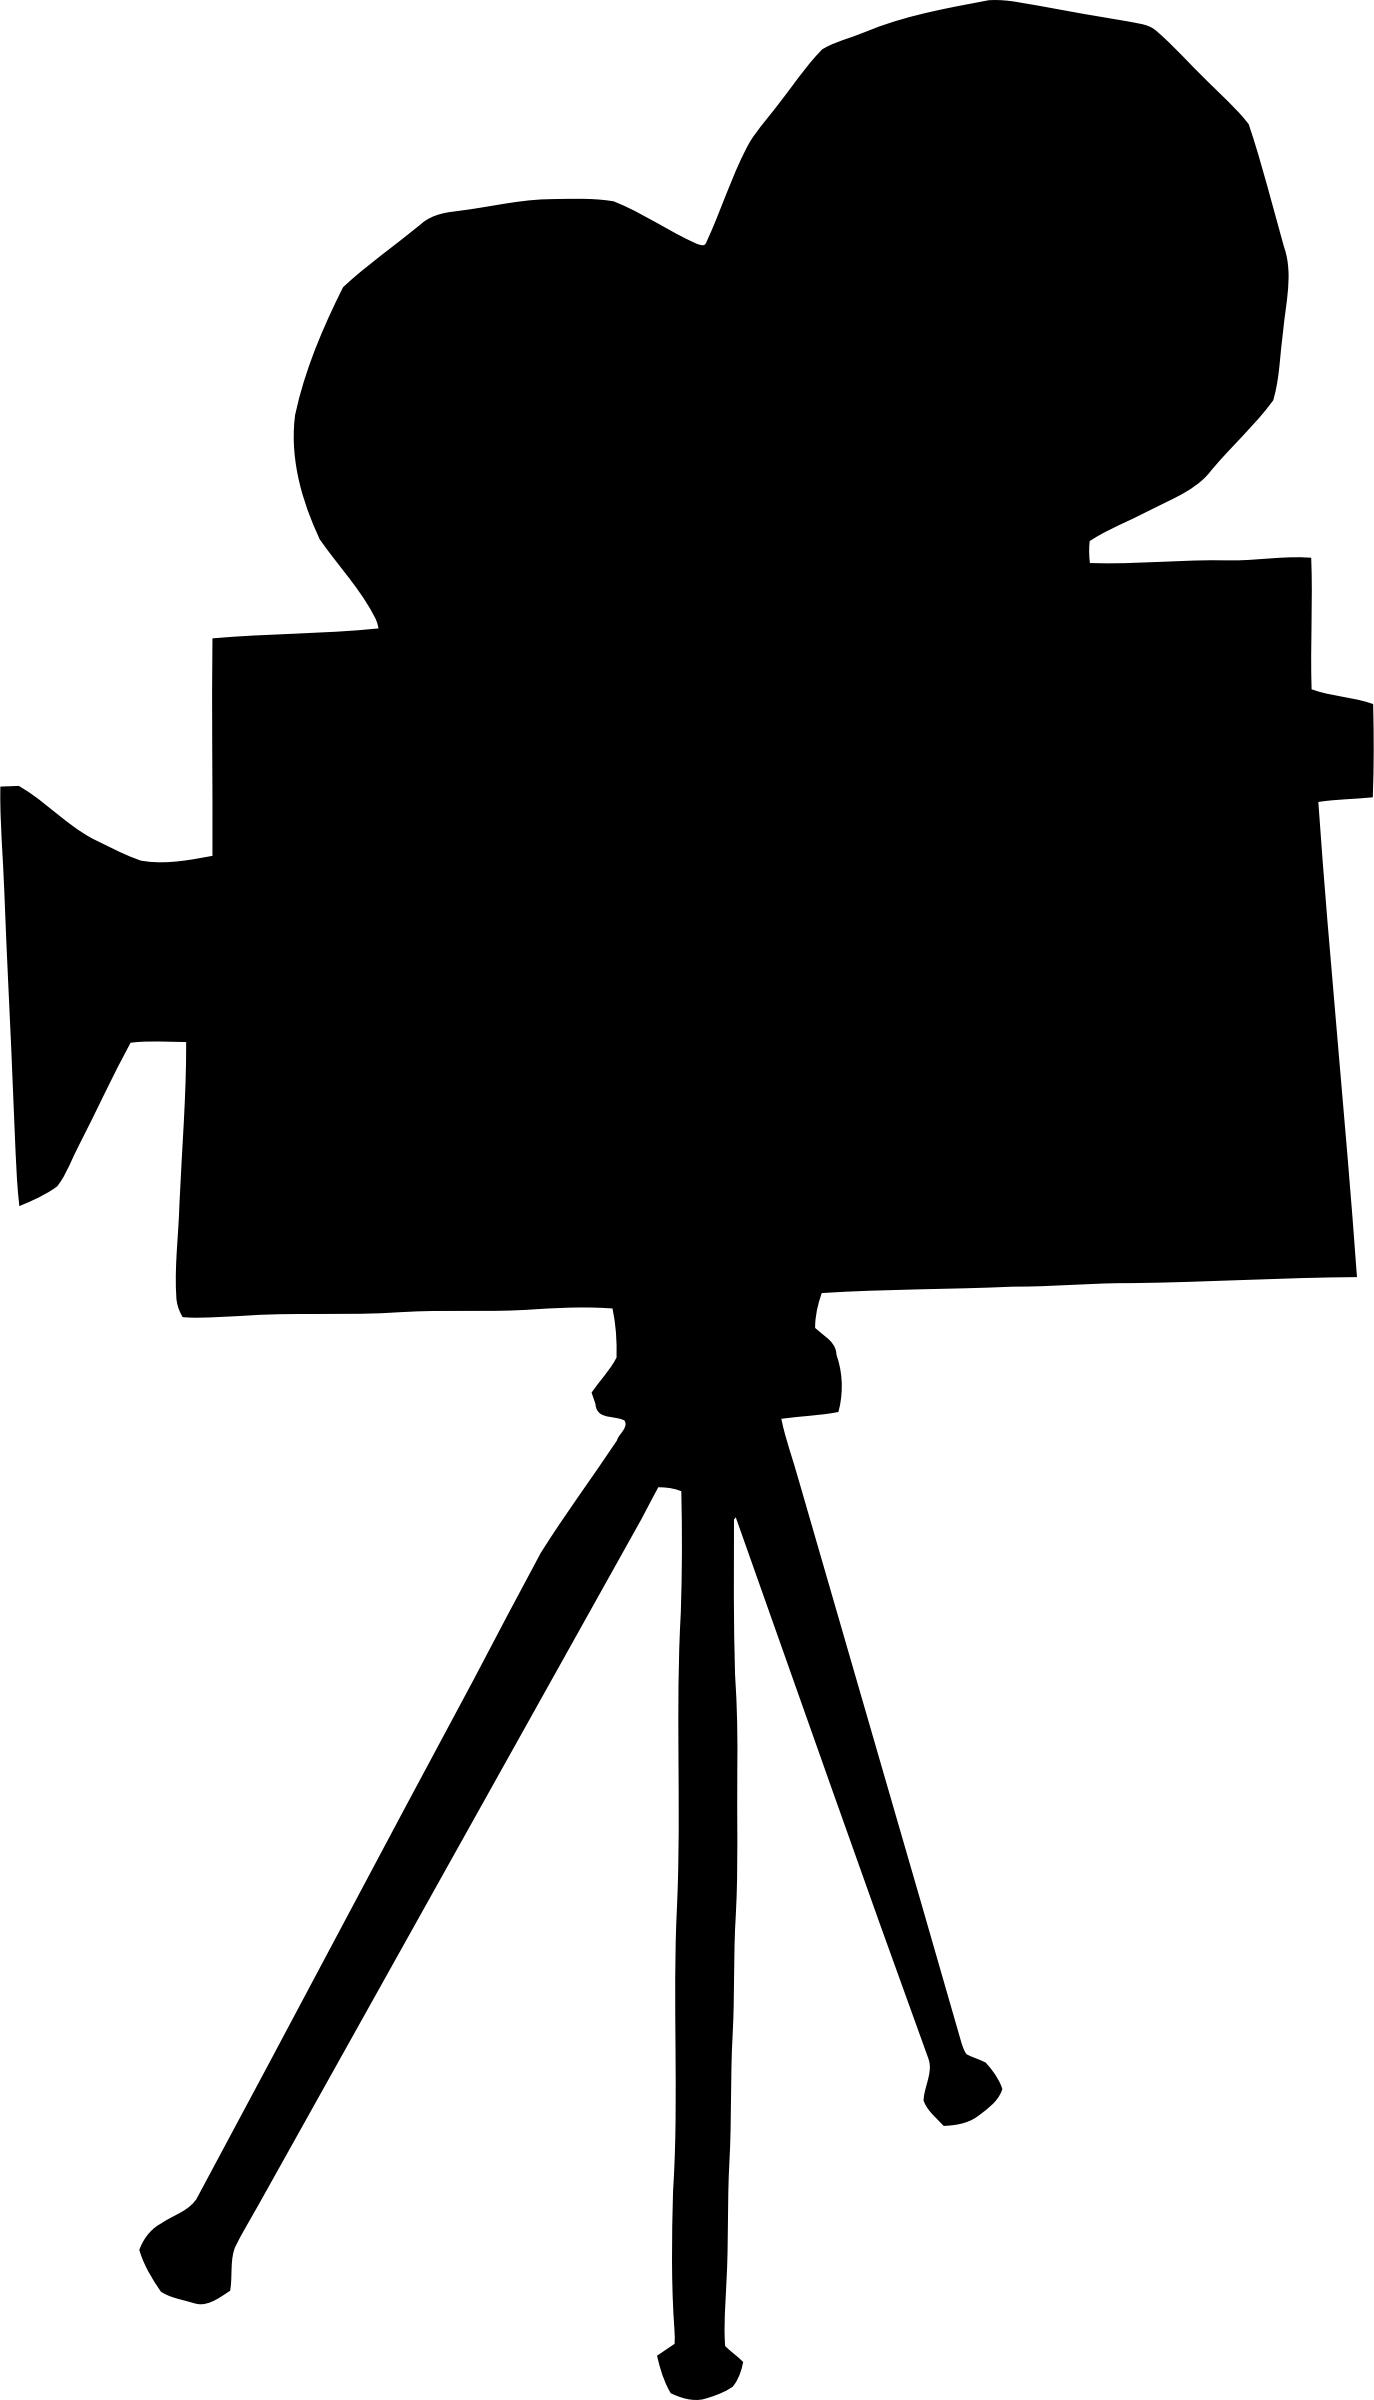 Movie projector vectorized png